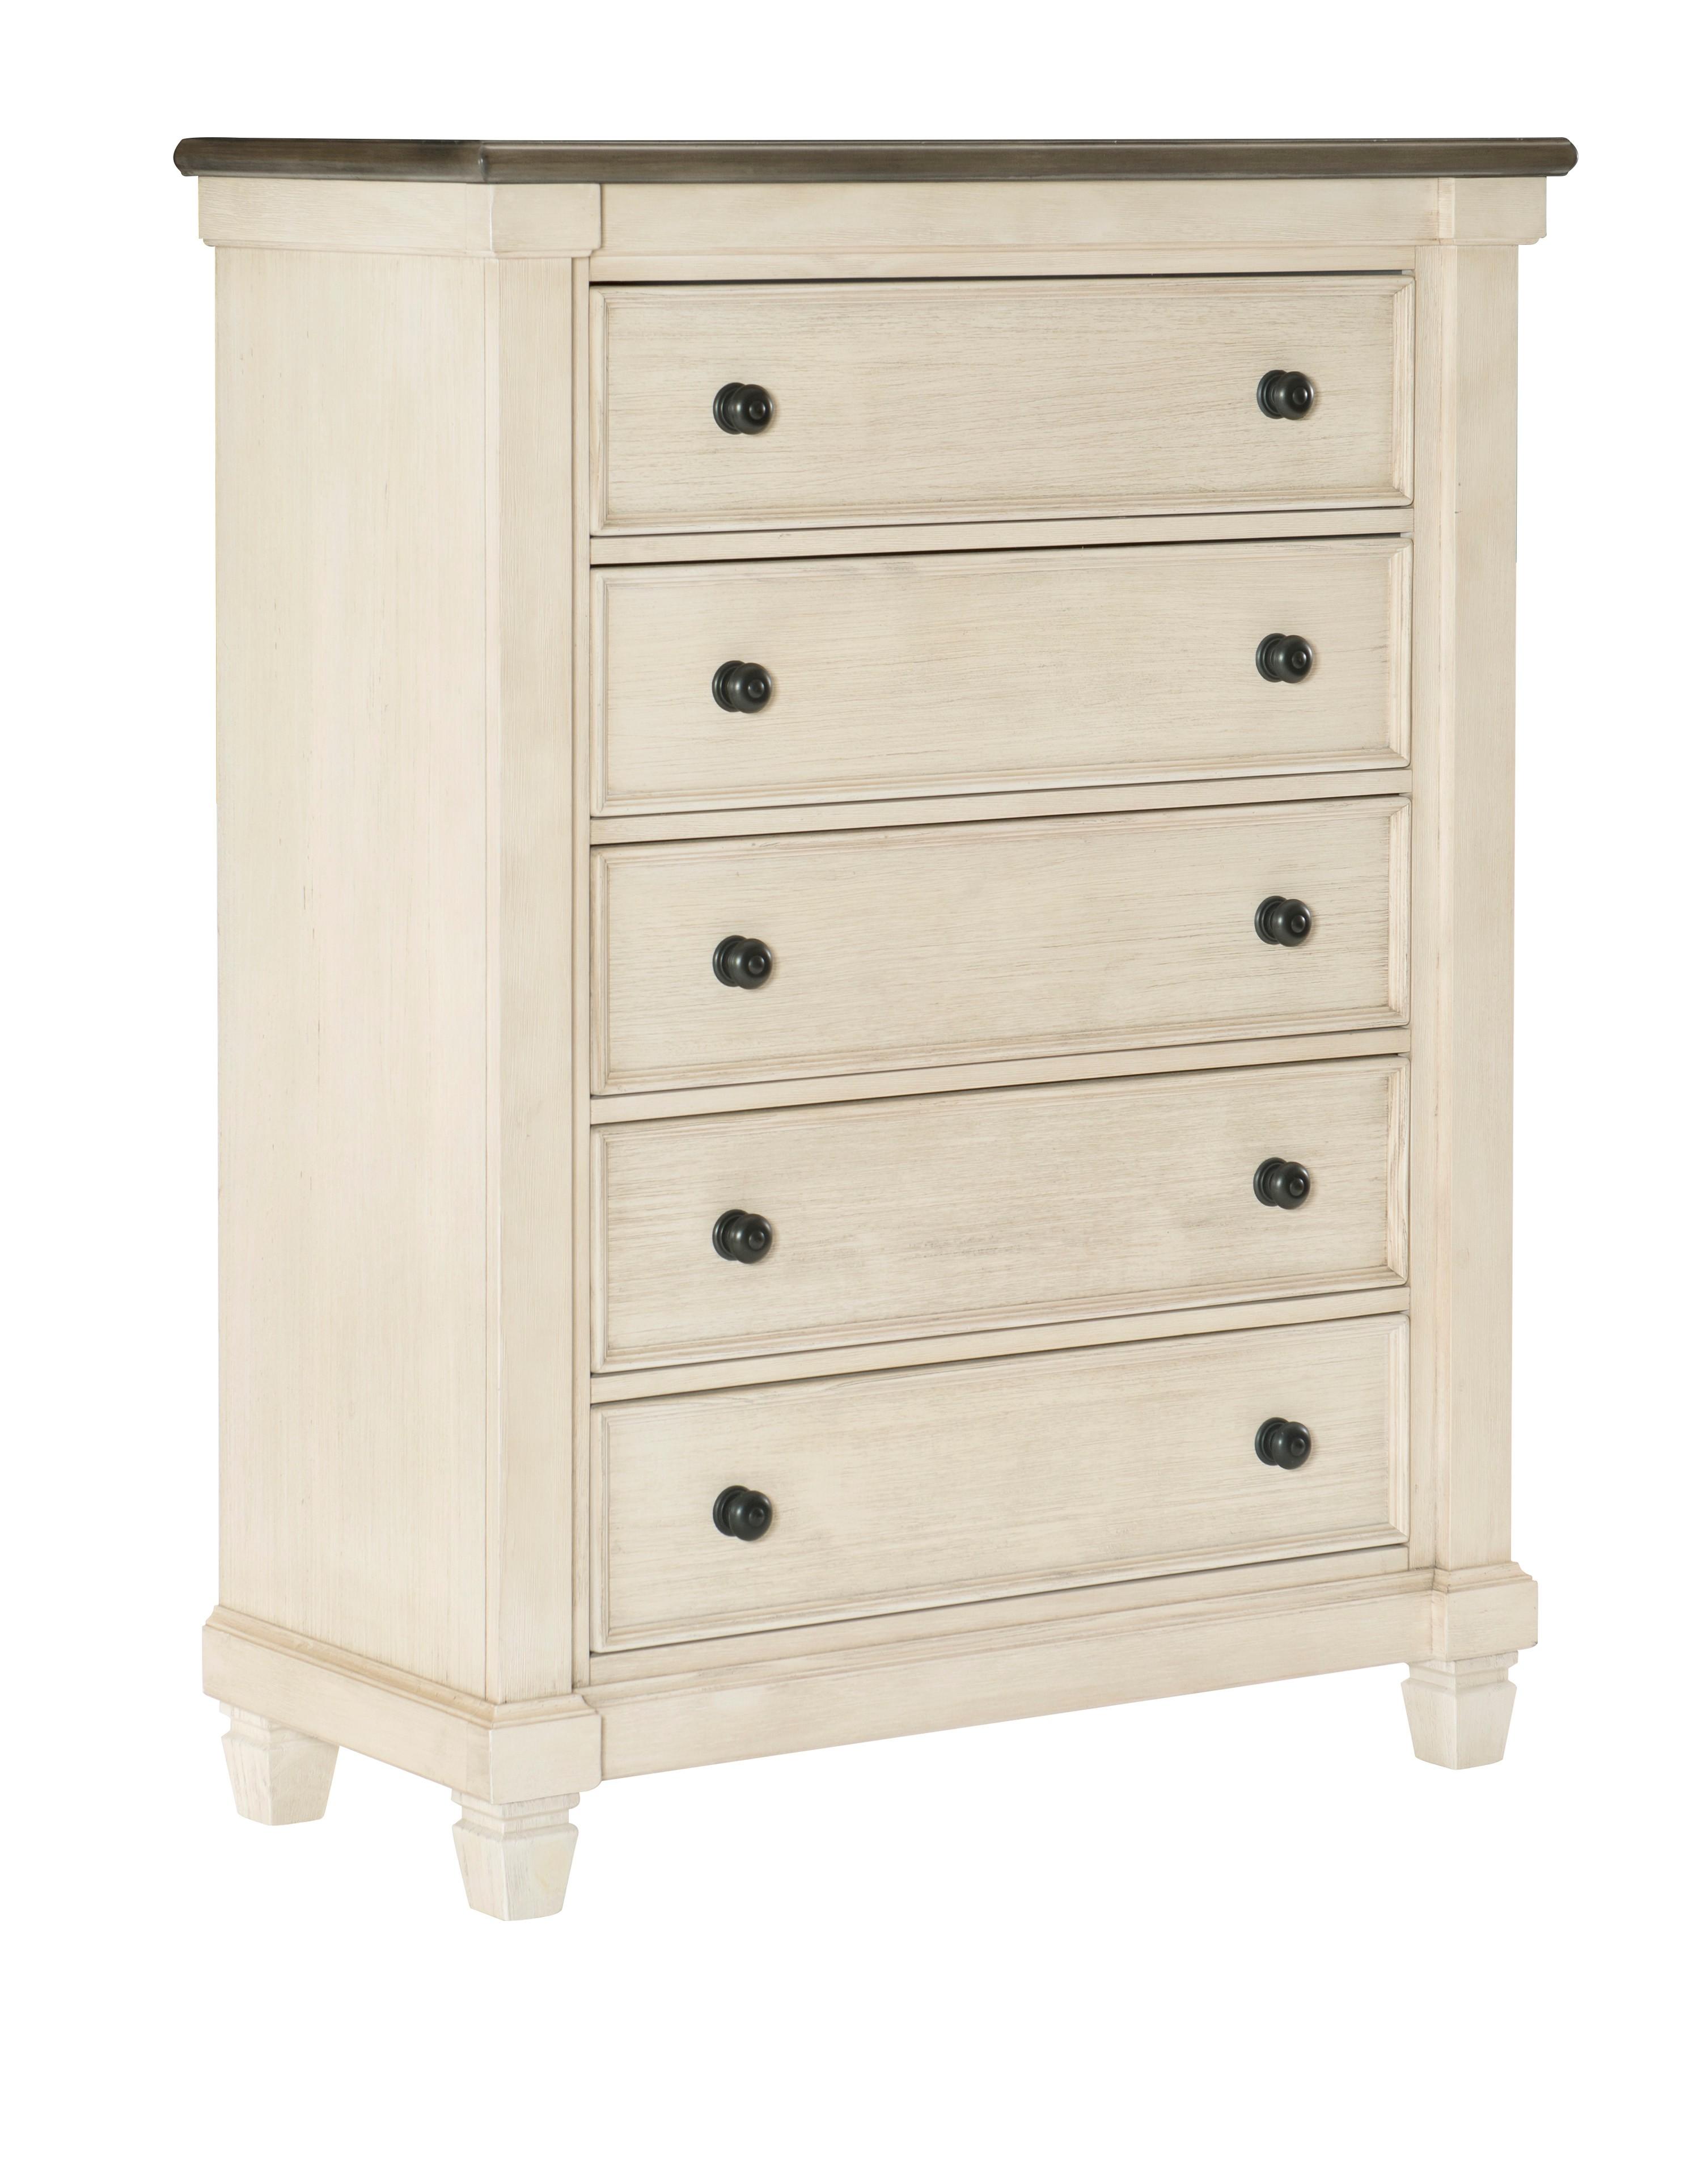 Transitional Chest 1626-9 Weaver 1626-9 in Antique White, Brown 